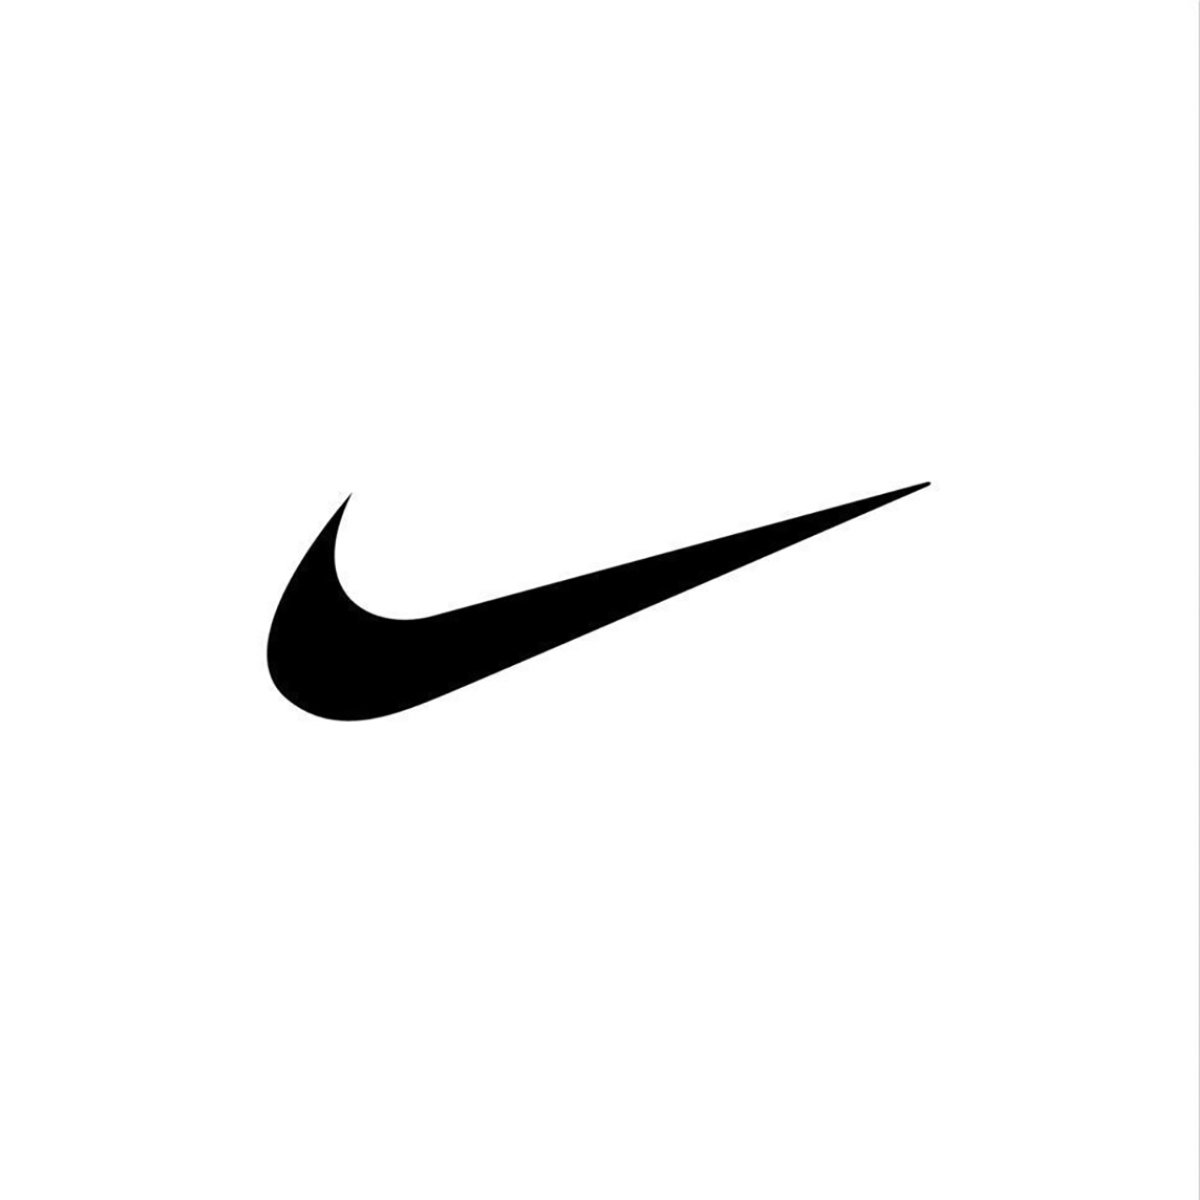 Nike logo on Unrivaled's client page.